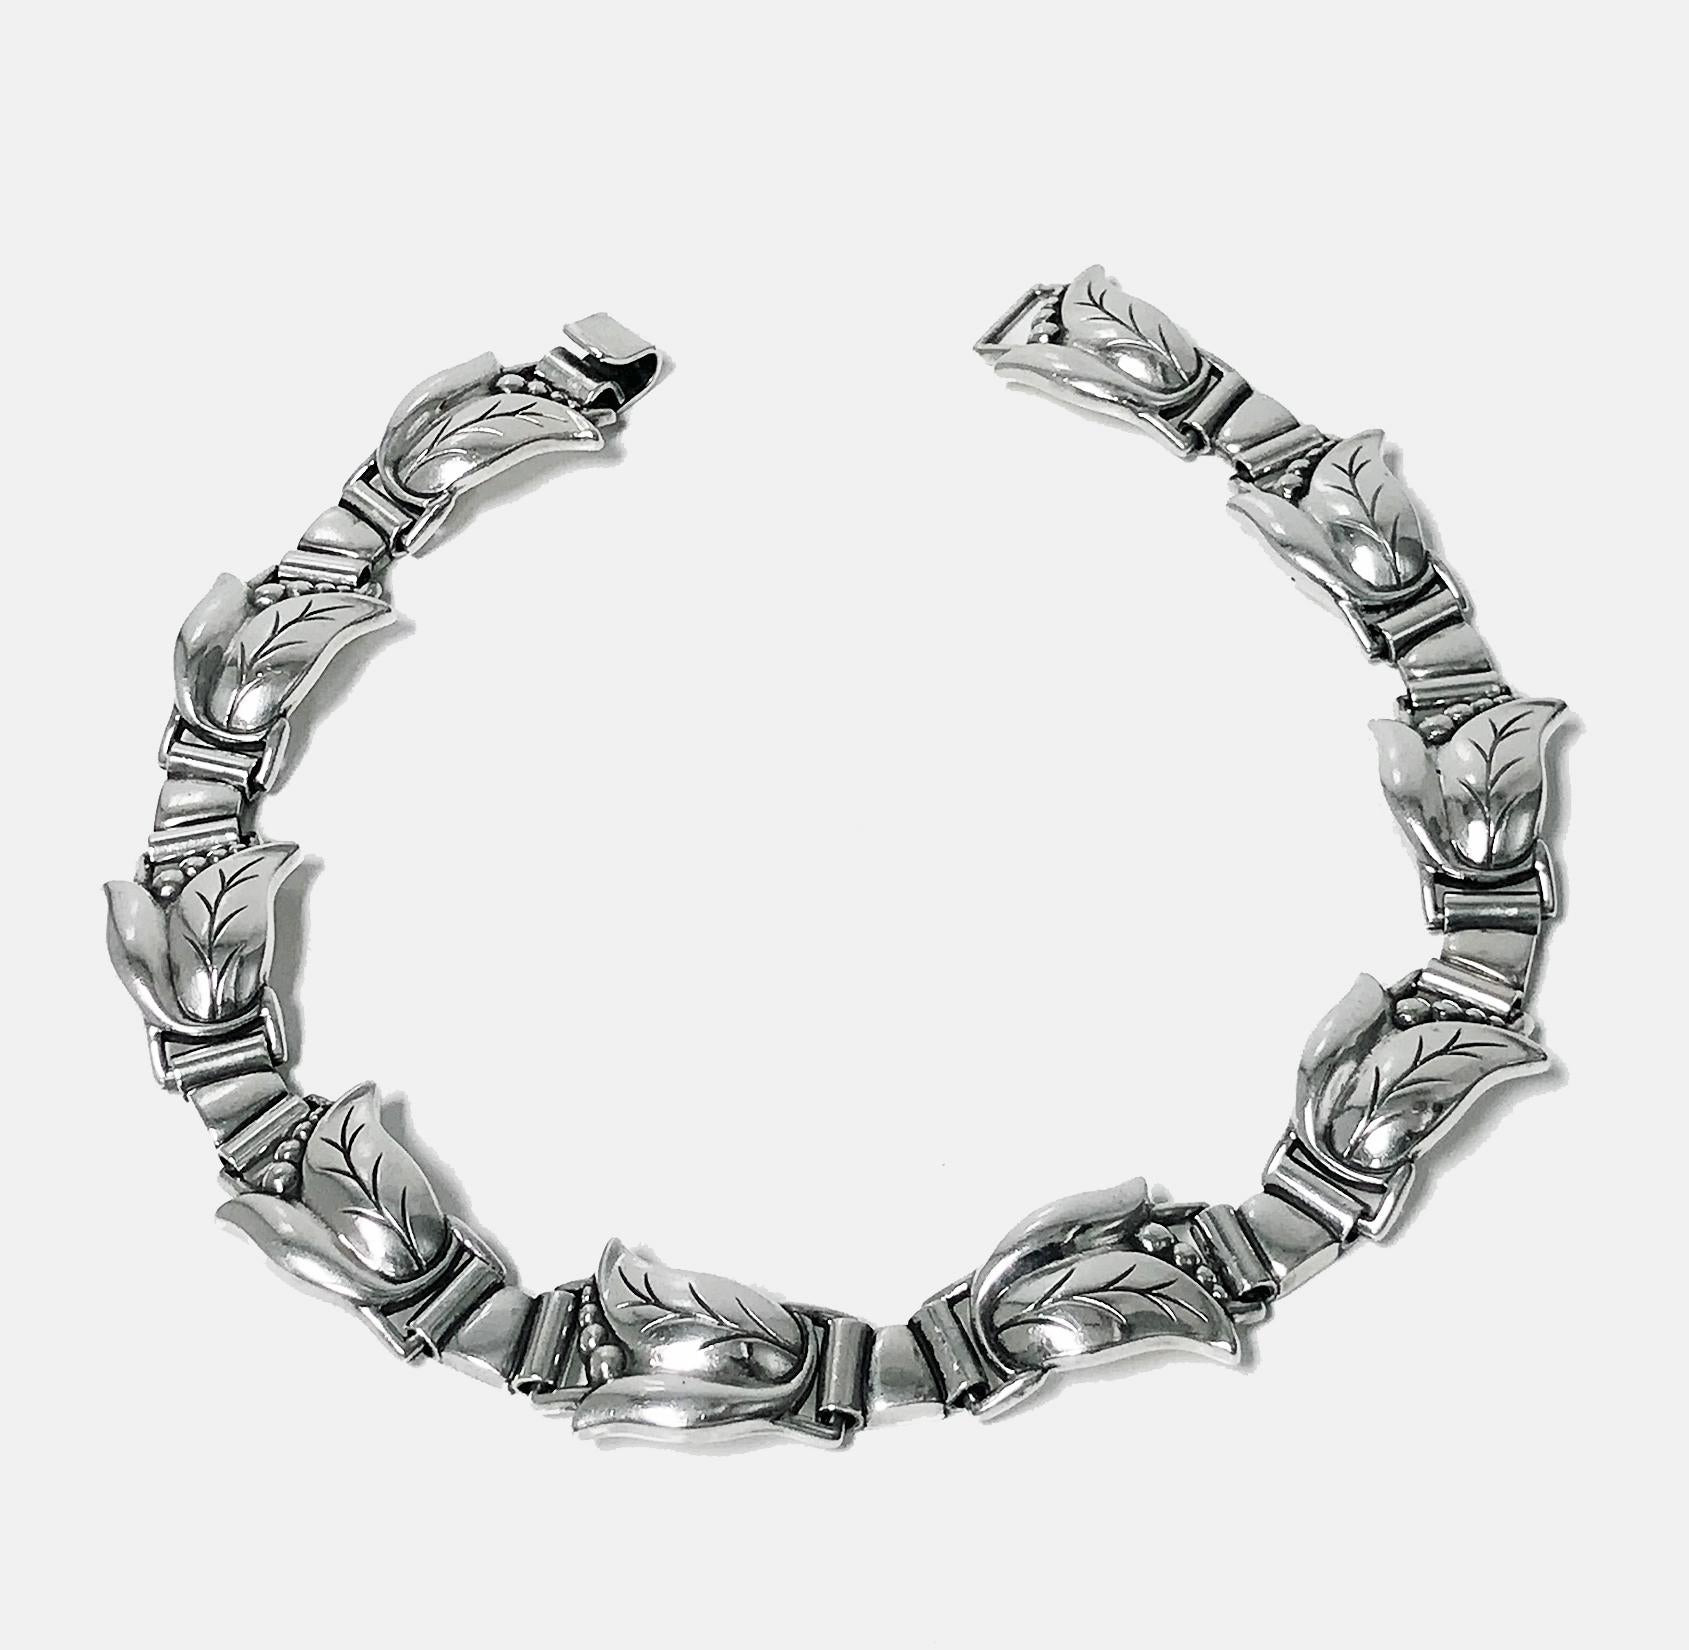 Georg Jensen Sterling convertible Necklace and Bracelet, C.1940. The Necklace and Bracelet, fleur danoise design, convertible to longer necklace, with hinged stylised tulip bud petal links, Georg Jensen Sterling USA marks to reverse and design